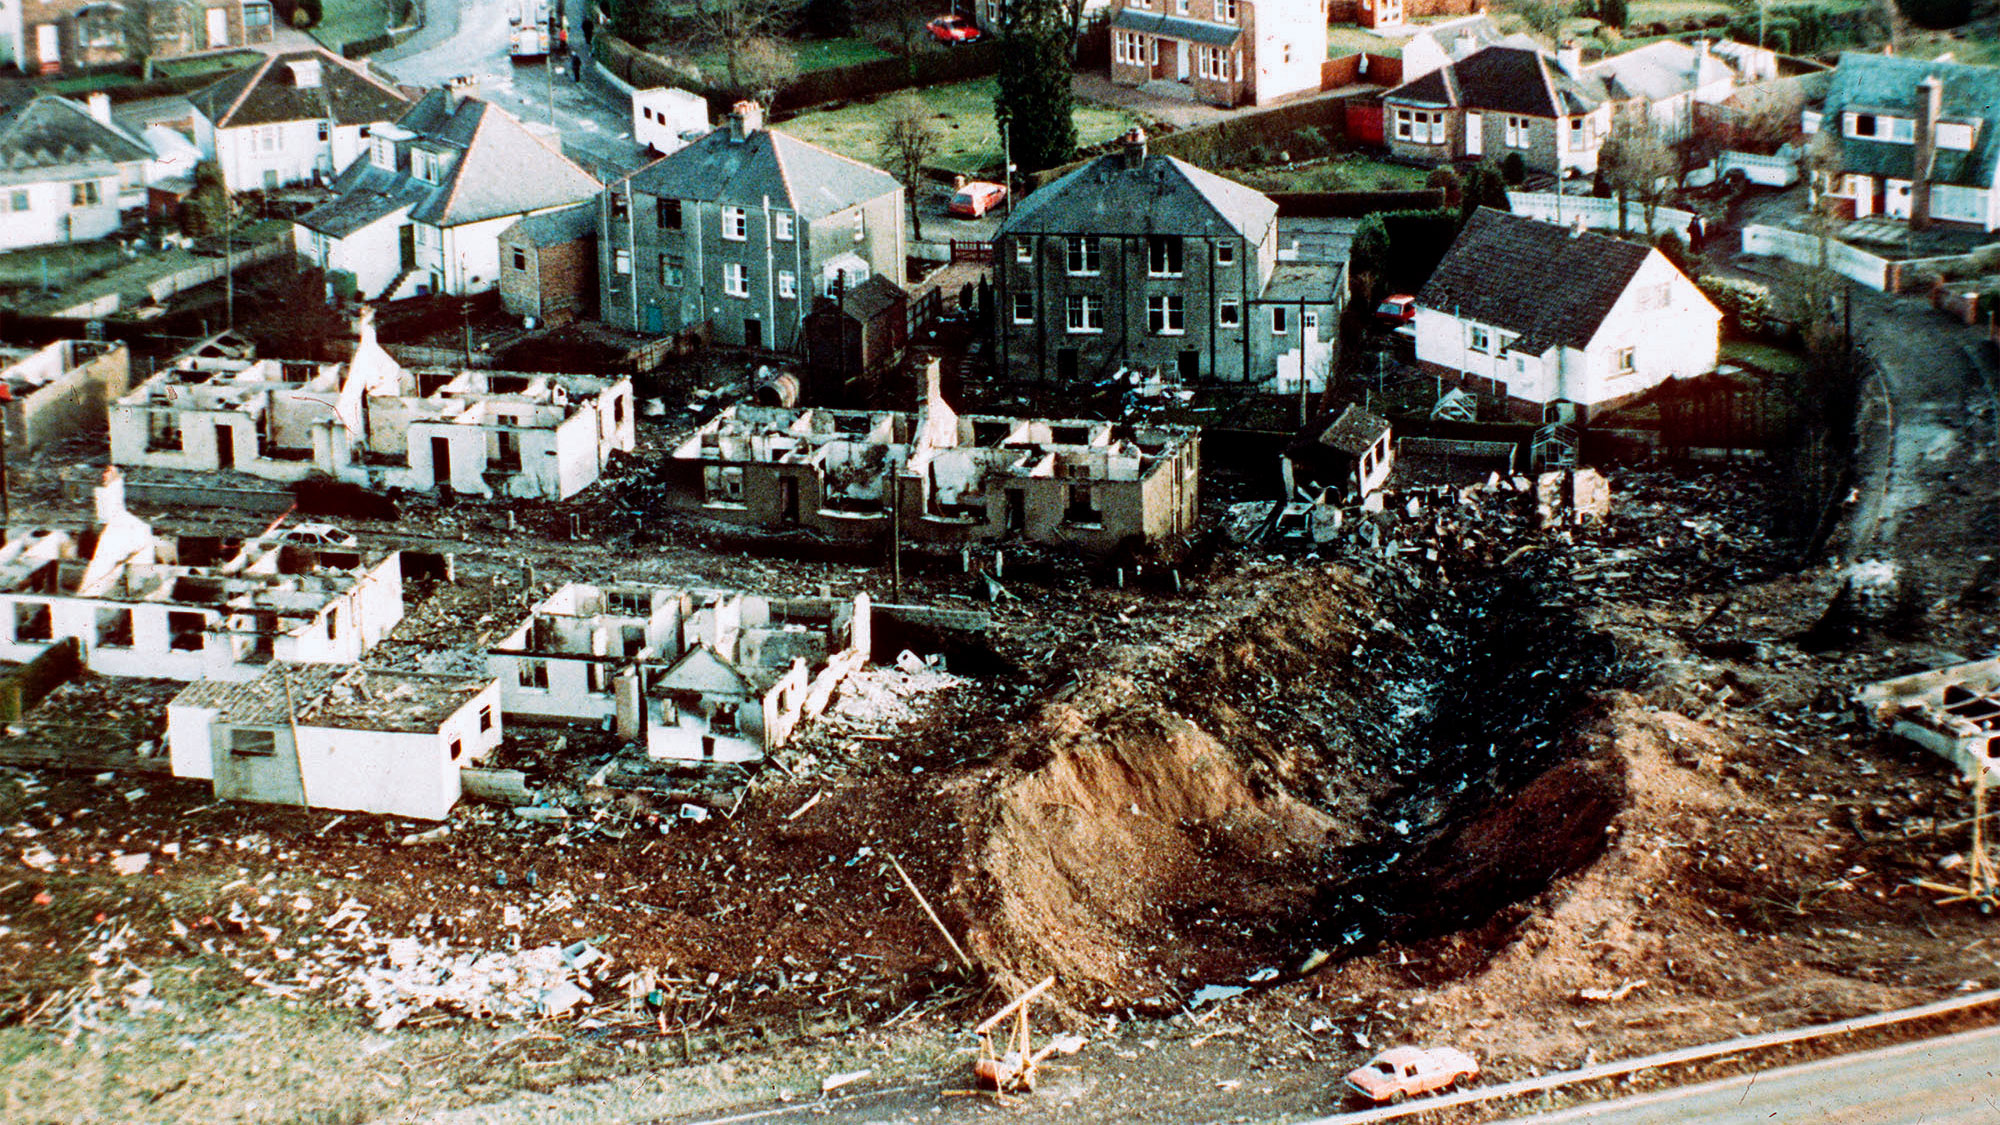 Wrecked houses are seen after the 1988 bombing over Lockerbie, Scotland.